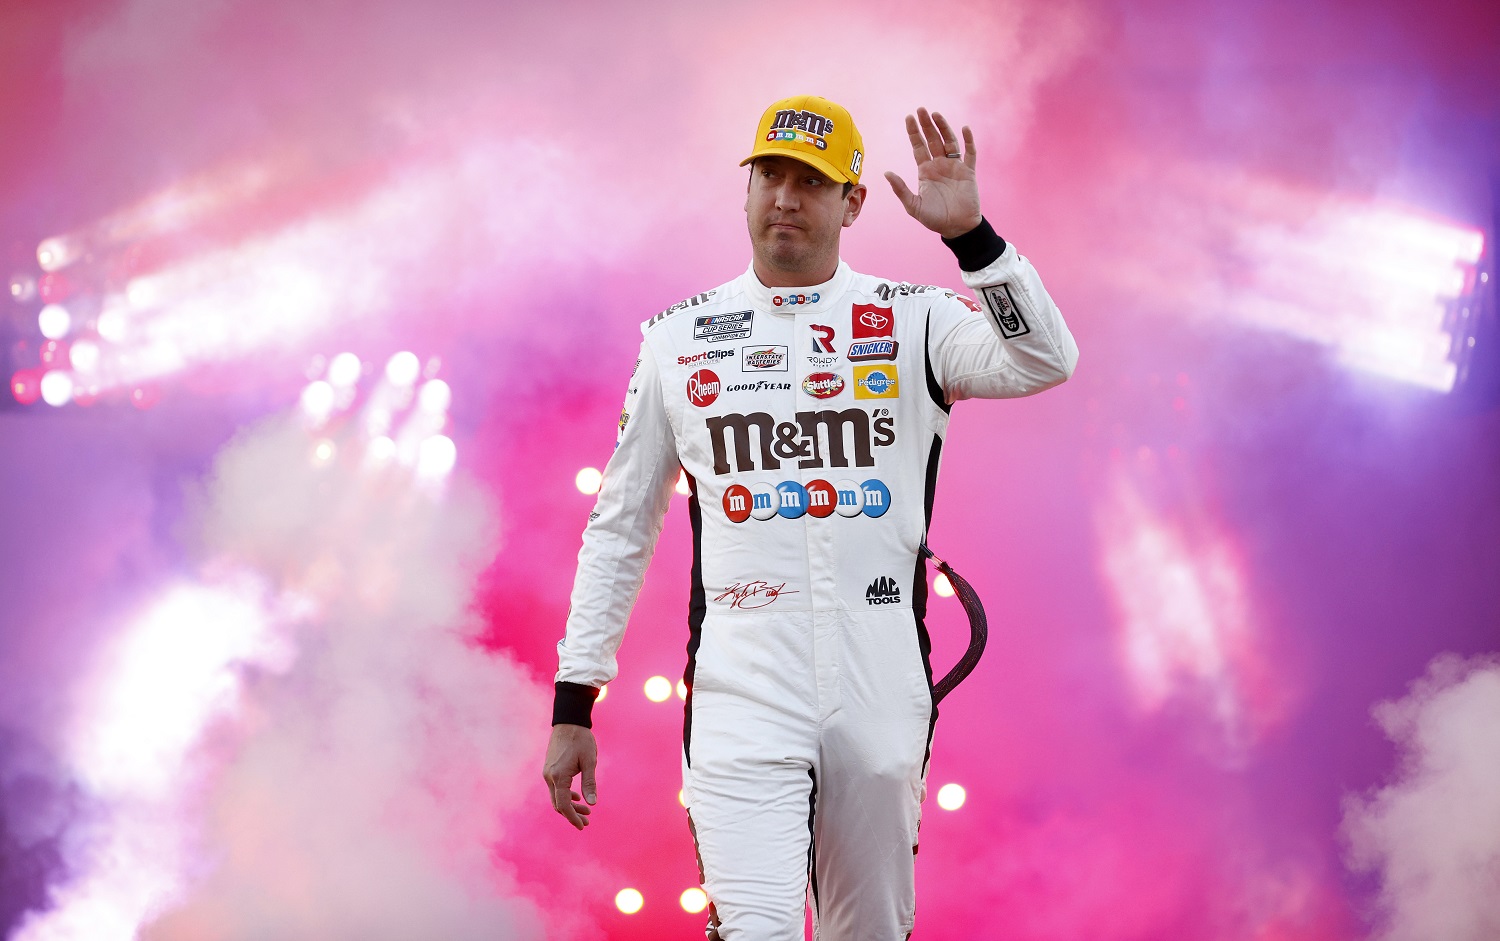 Kyle Busch walks on stage during pre-race ceremonies at the NASCAR Cup Series Federated Auto Parts 400 Salute to First Responders at Richmond Raceway on Sept. 11, 2021.